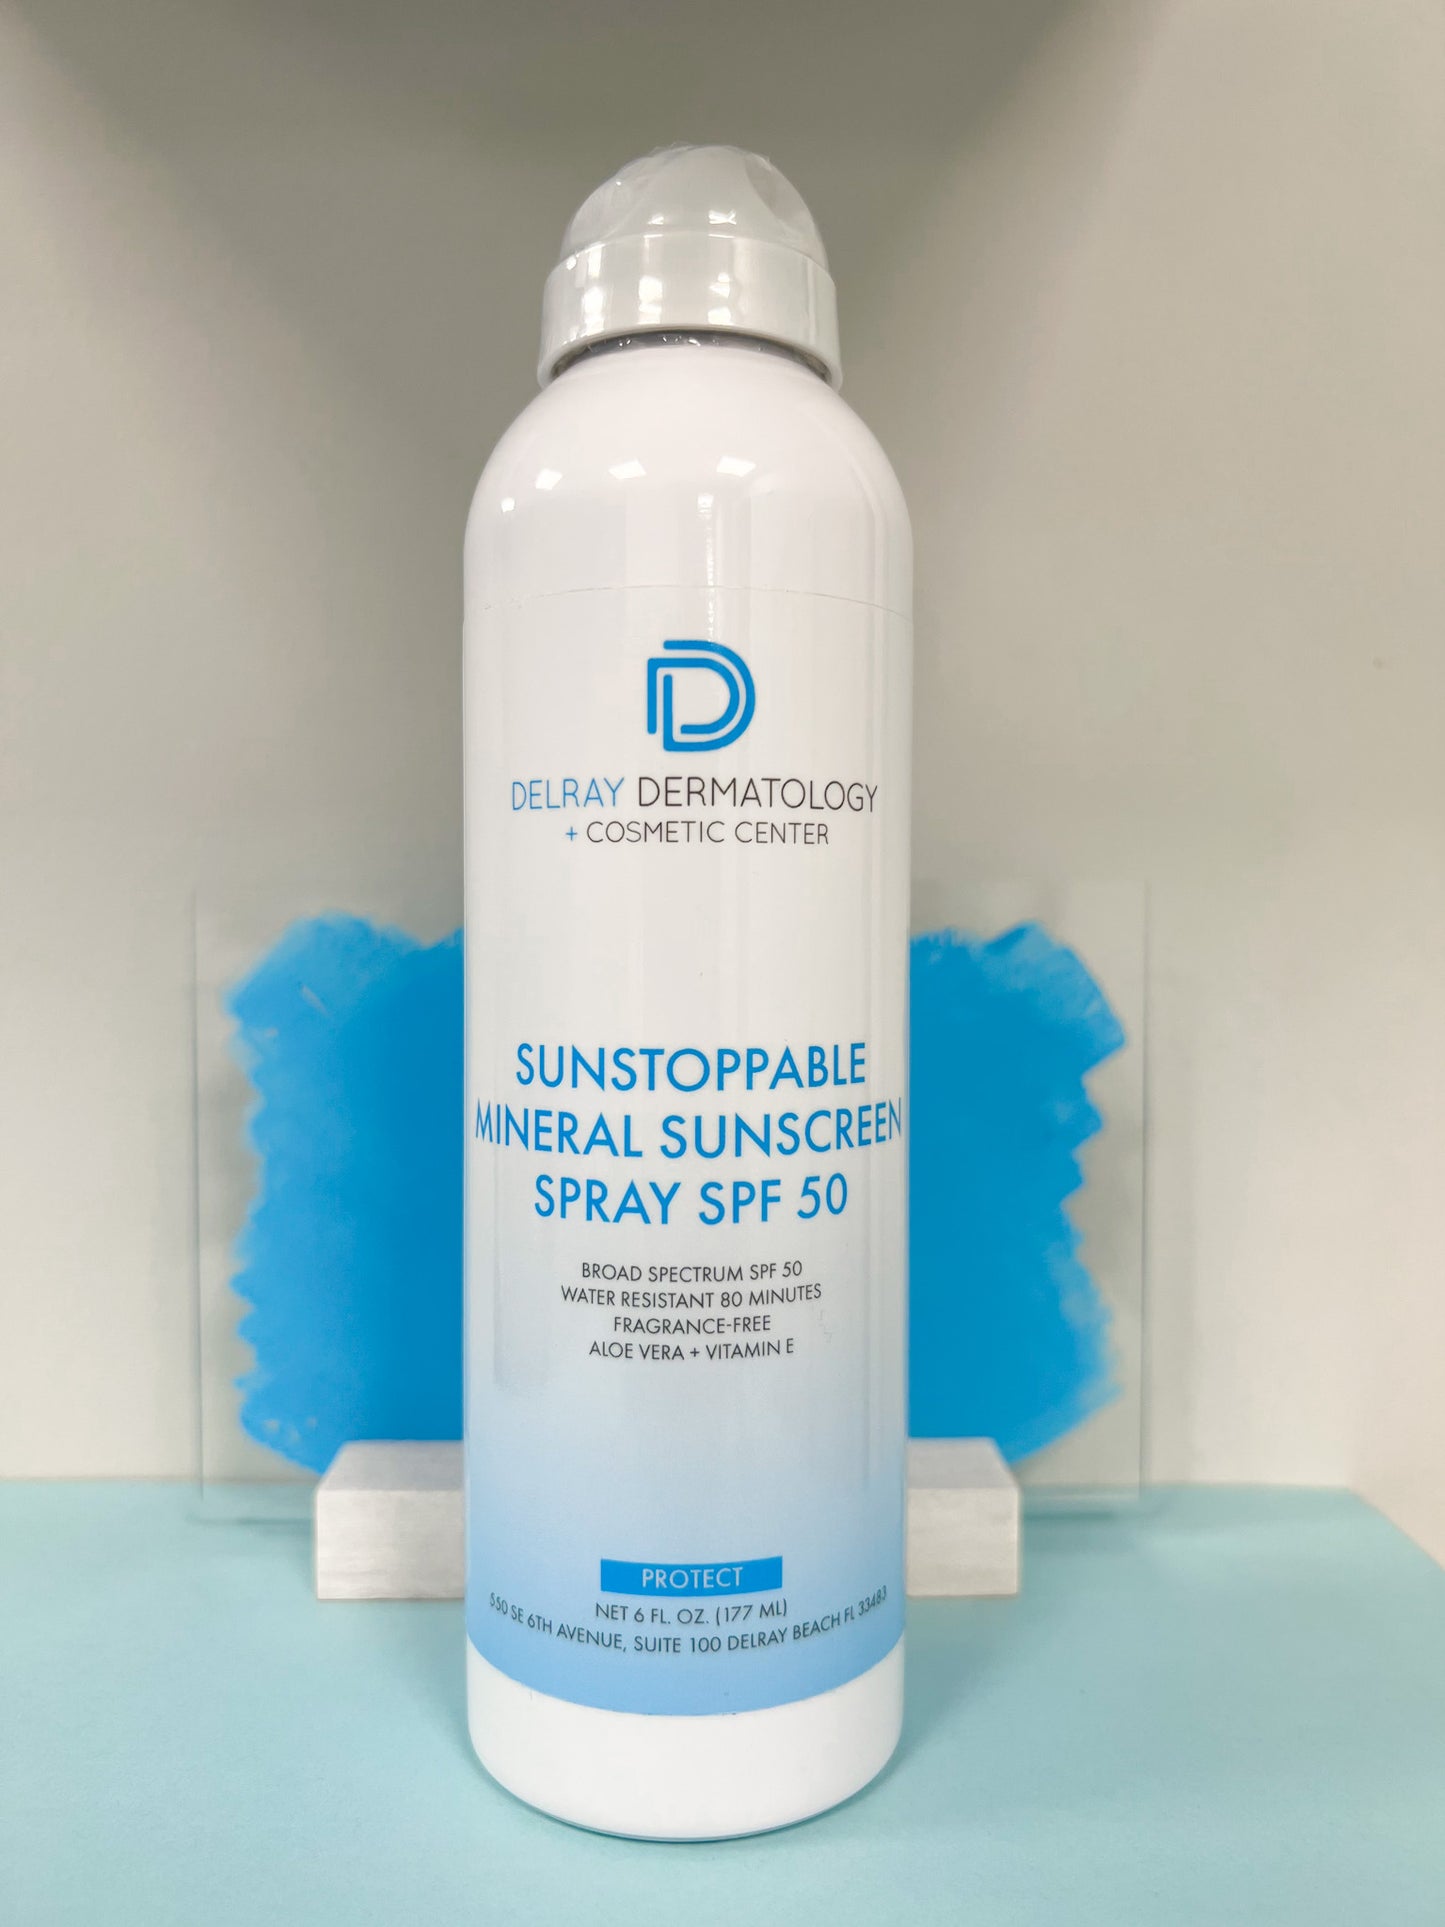 Sunstoppable Mineral Sunscreen Spray